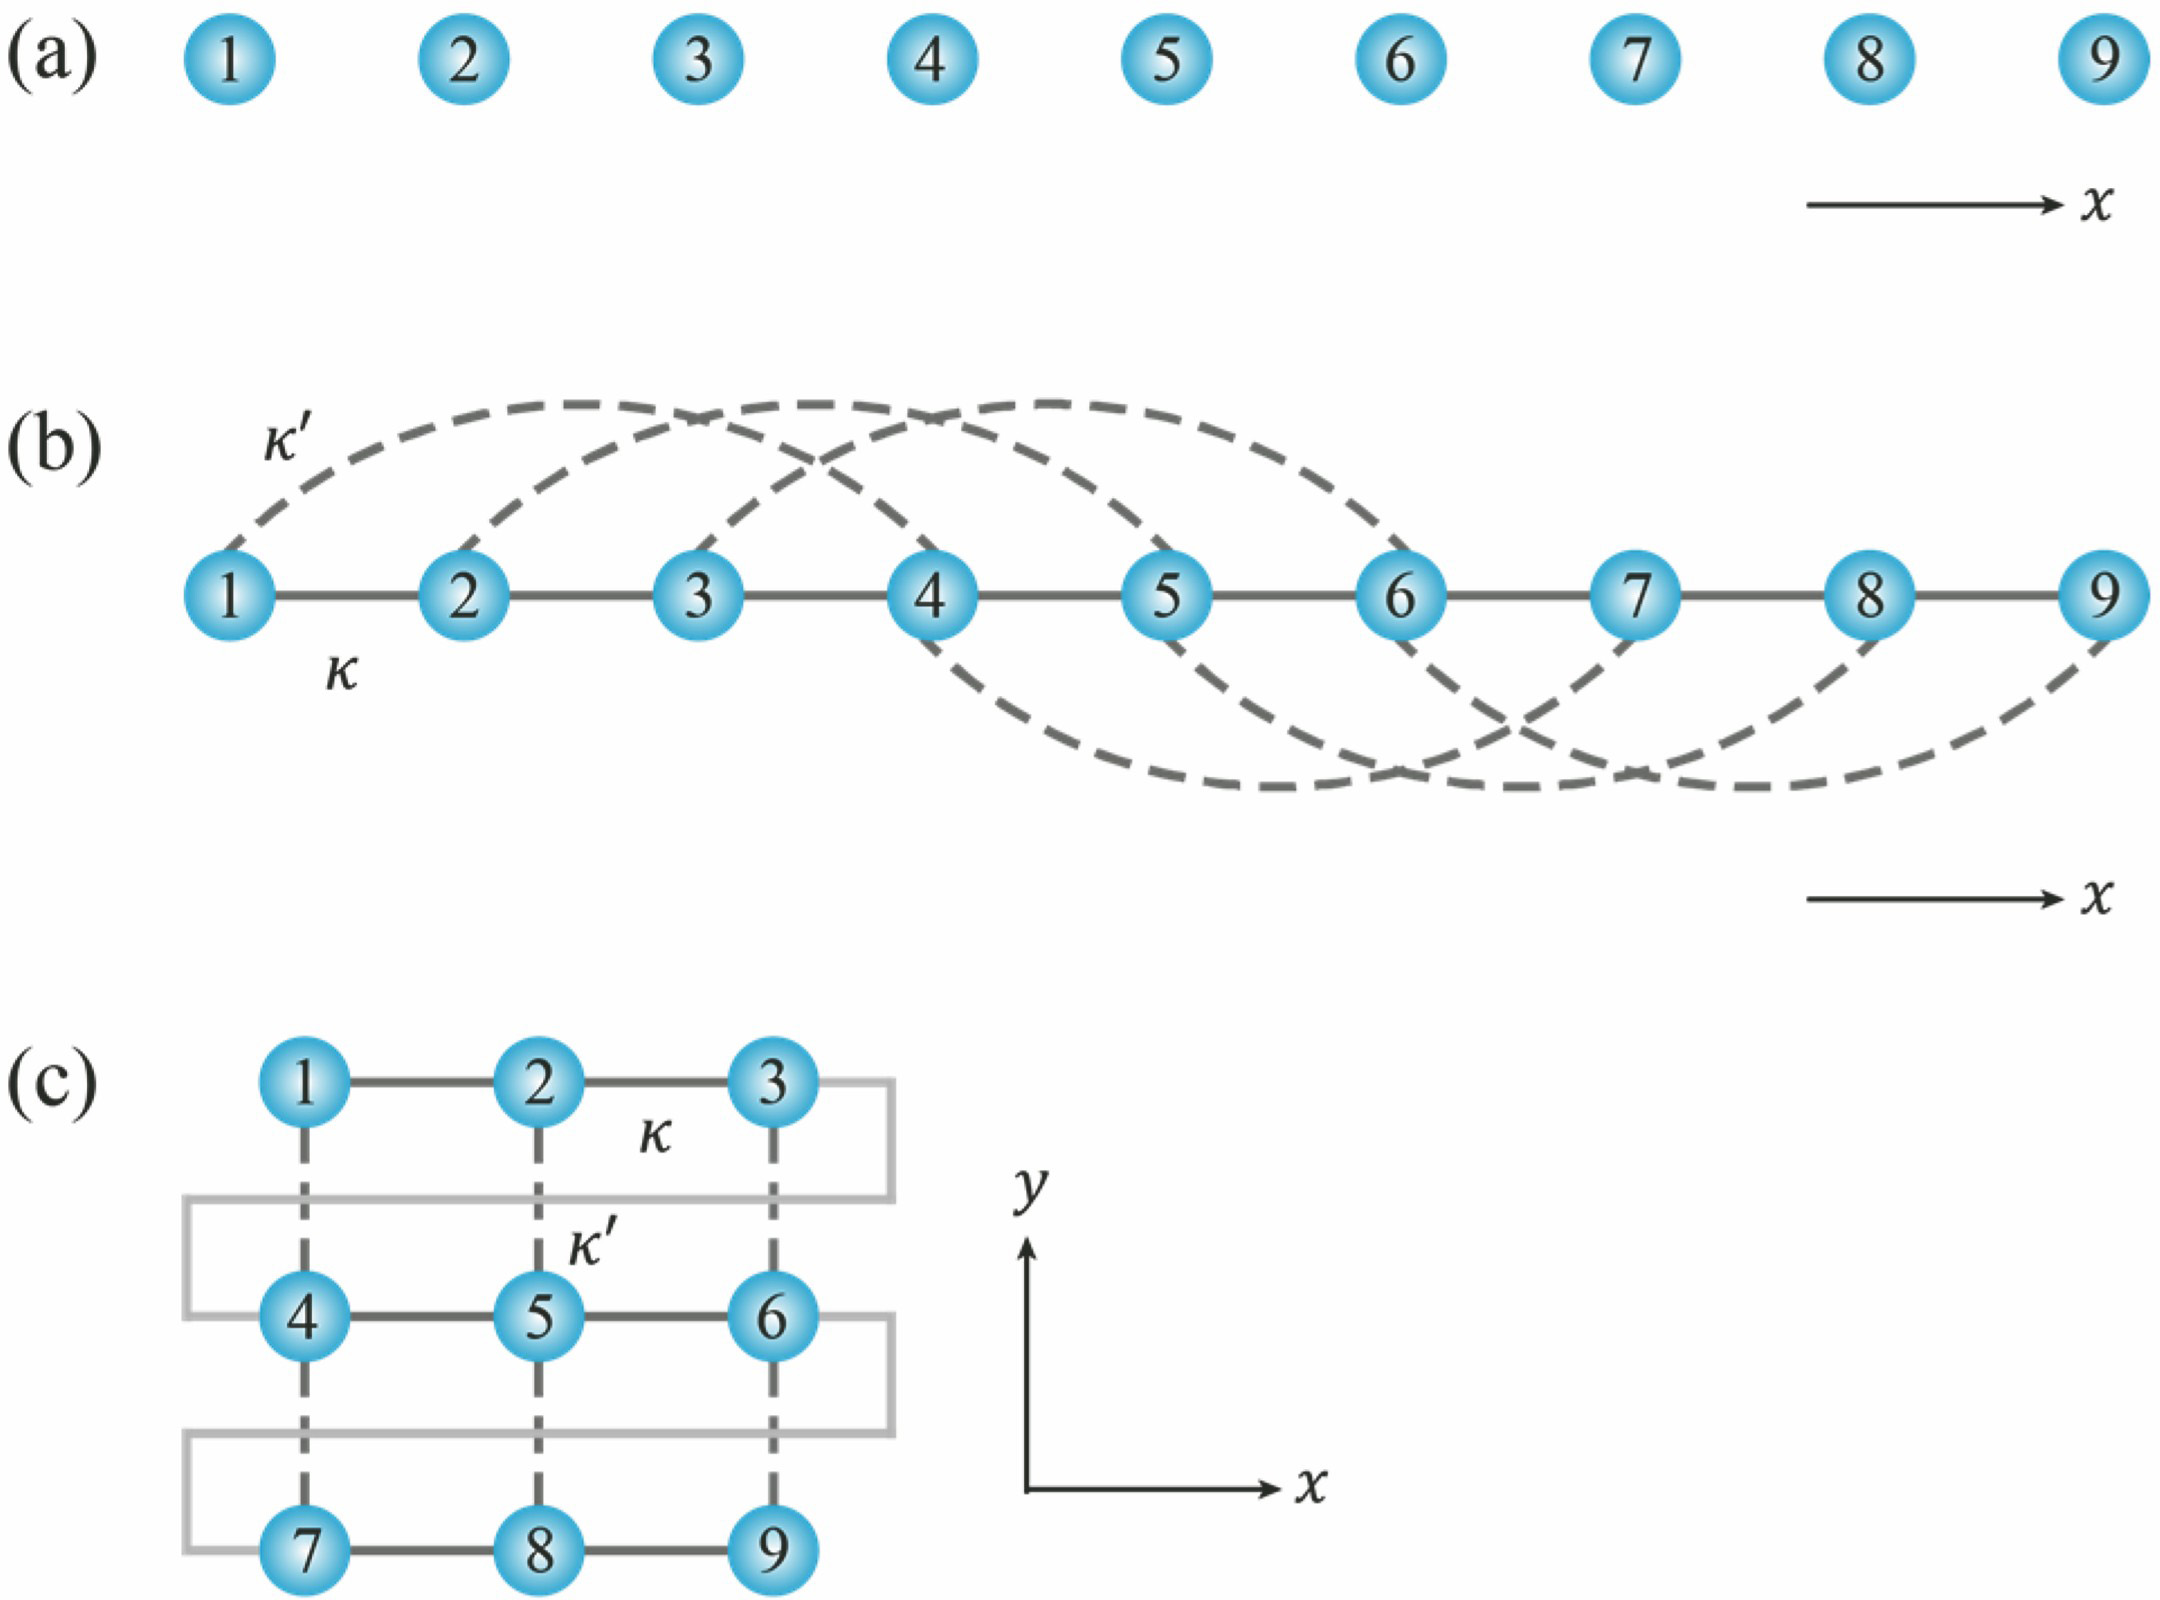 Forming artificial lattices. (a) Physical states labeled by consecutive integers; (b) introducing nearest-neighbor coupling between physical states to create a one-dimensional system; (c) introducing a special long-range coupling between physical states to create a two-dimensional system[56-57]